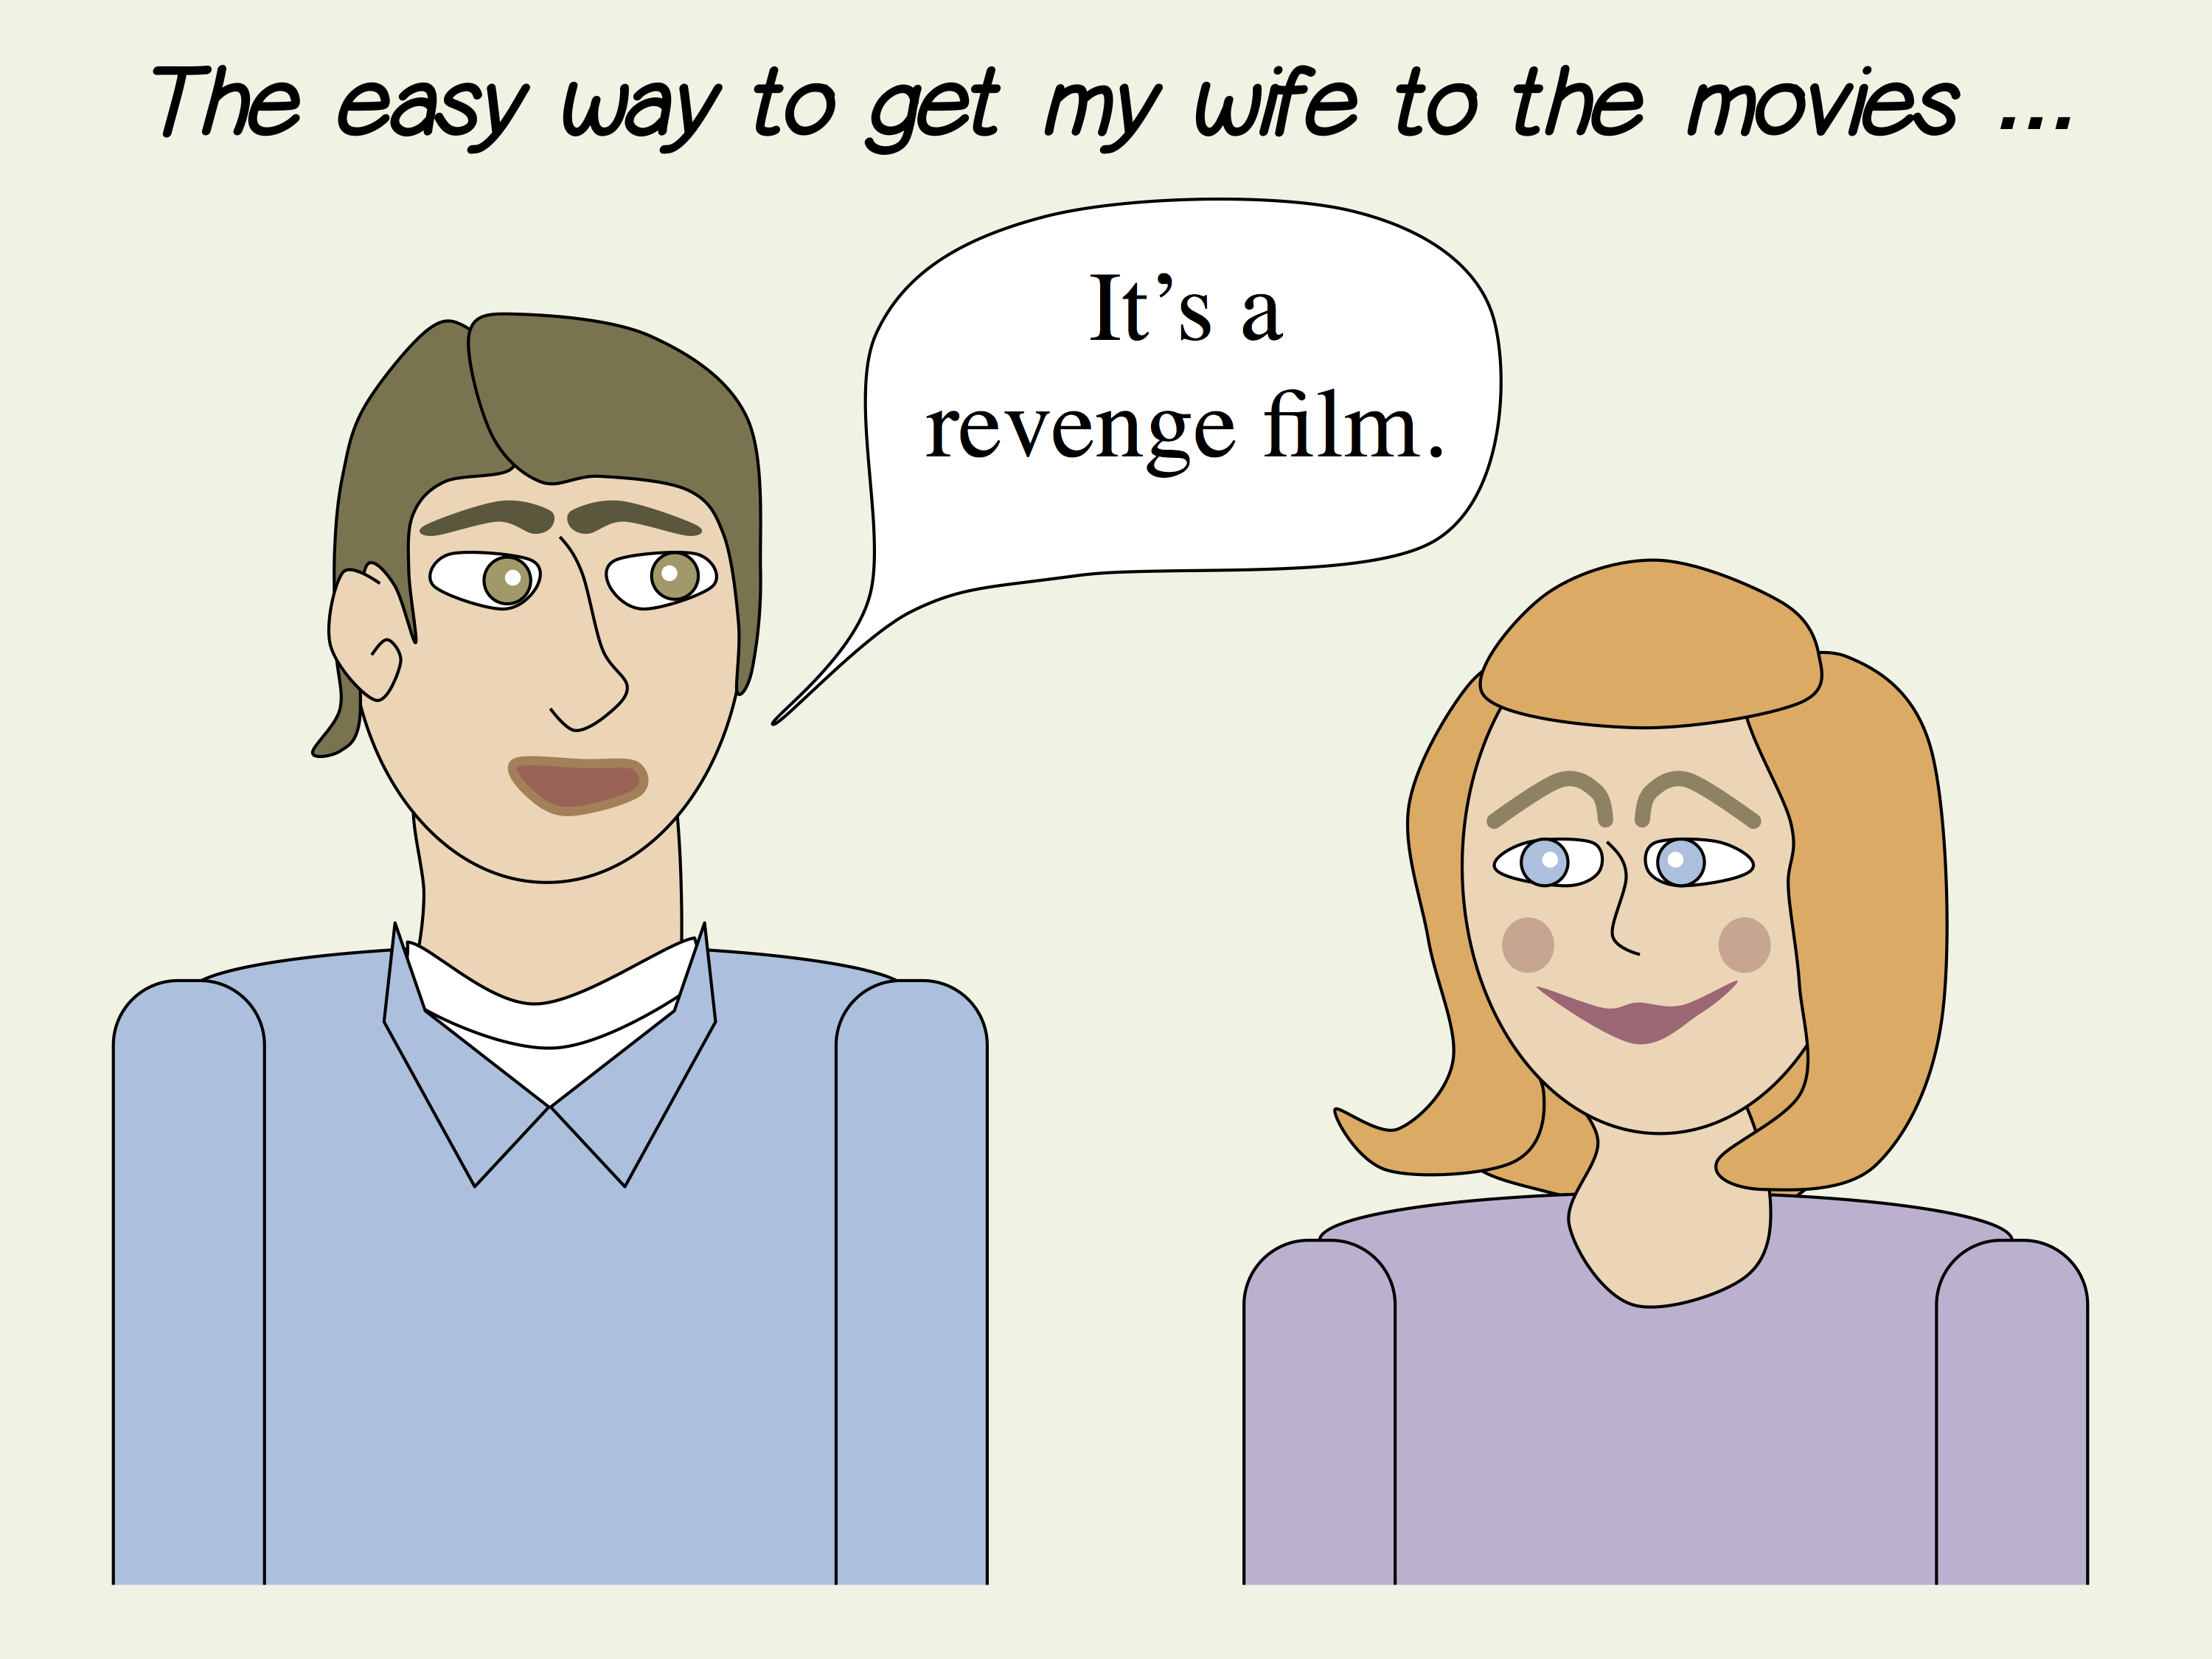 The easy way to get my wife to the movies - it's a revenge film